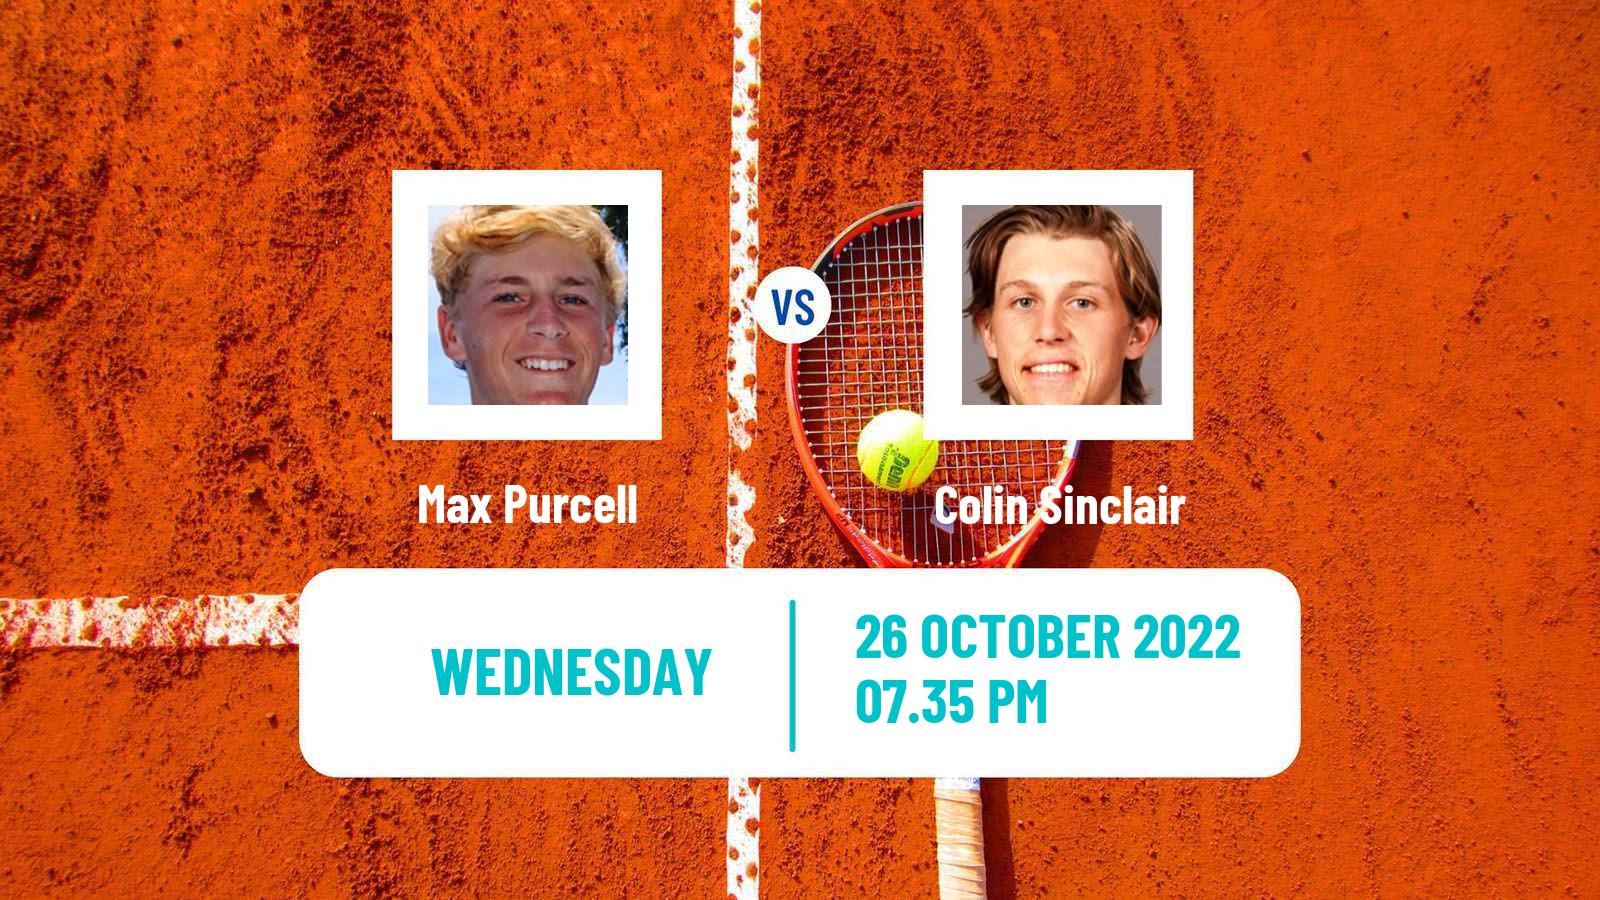 Tennis ATP Challenger Max Purcell - Colin Sinclair